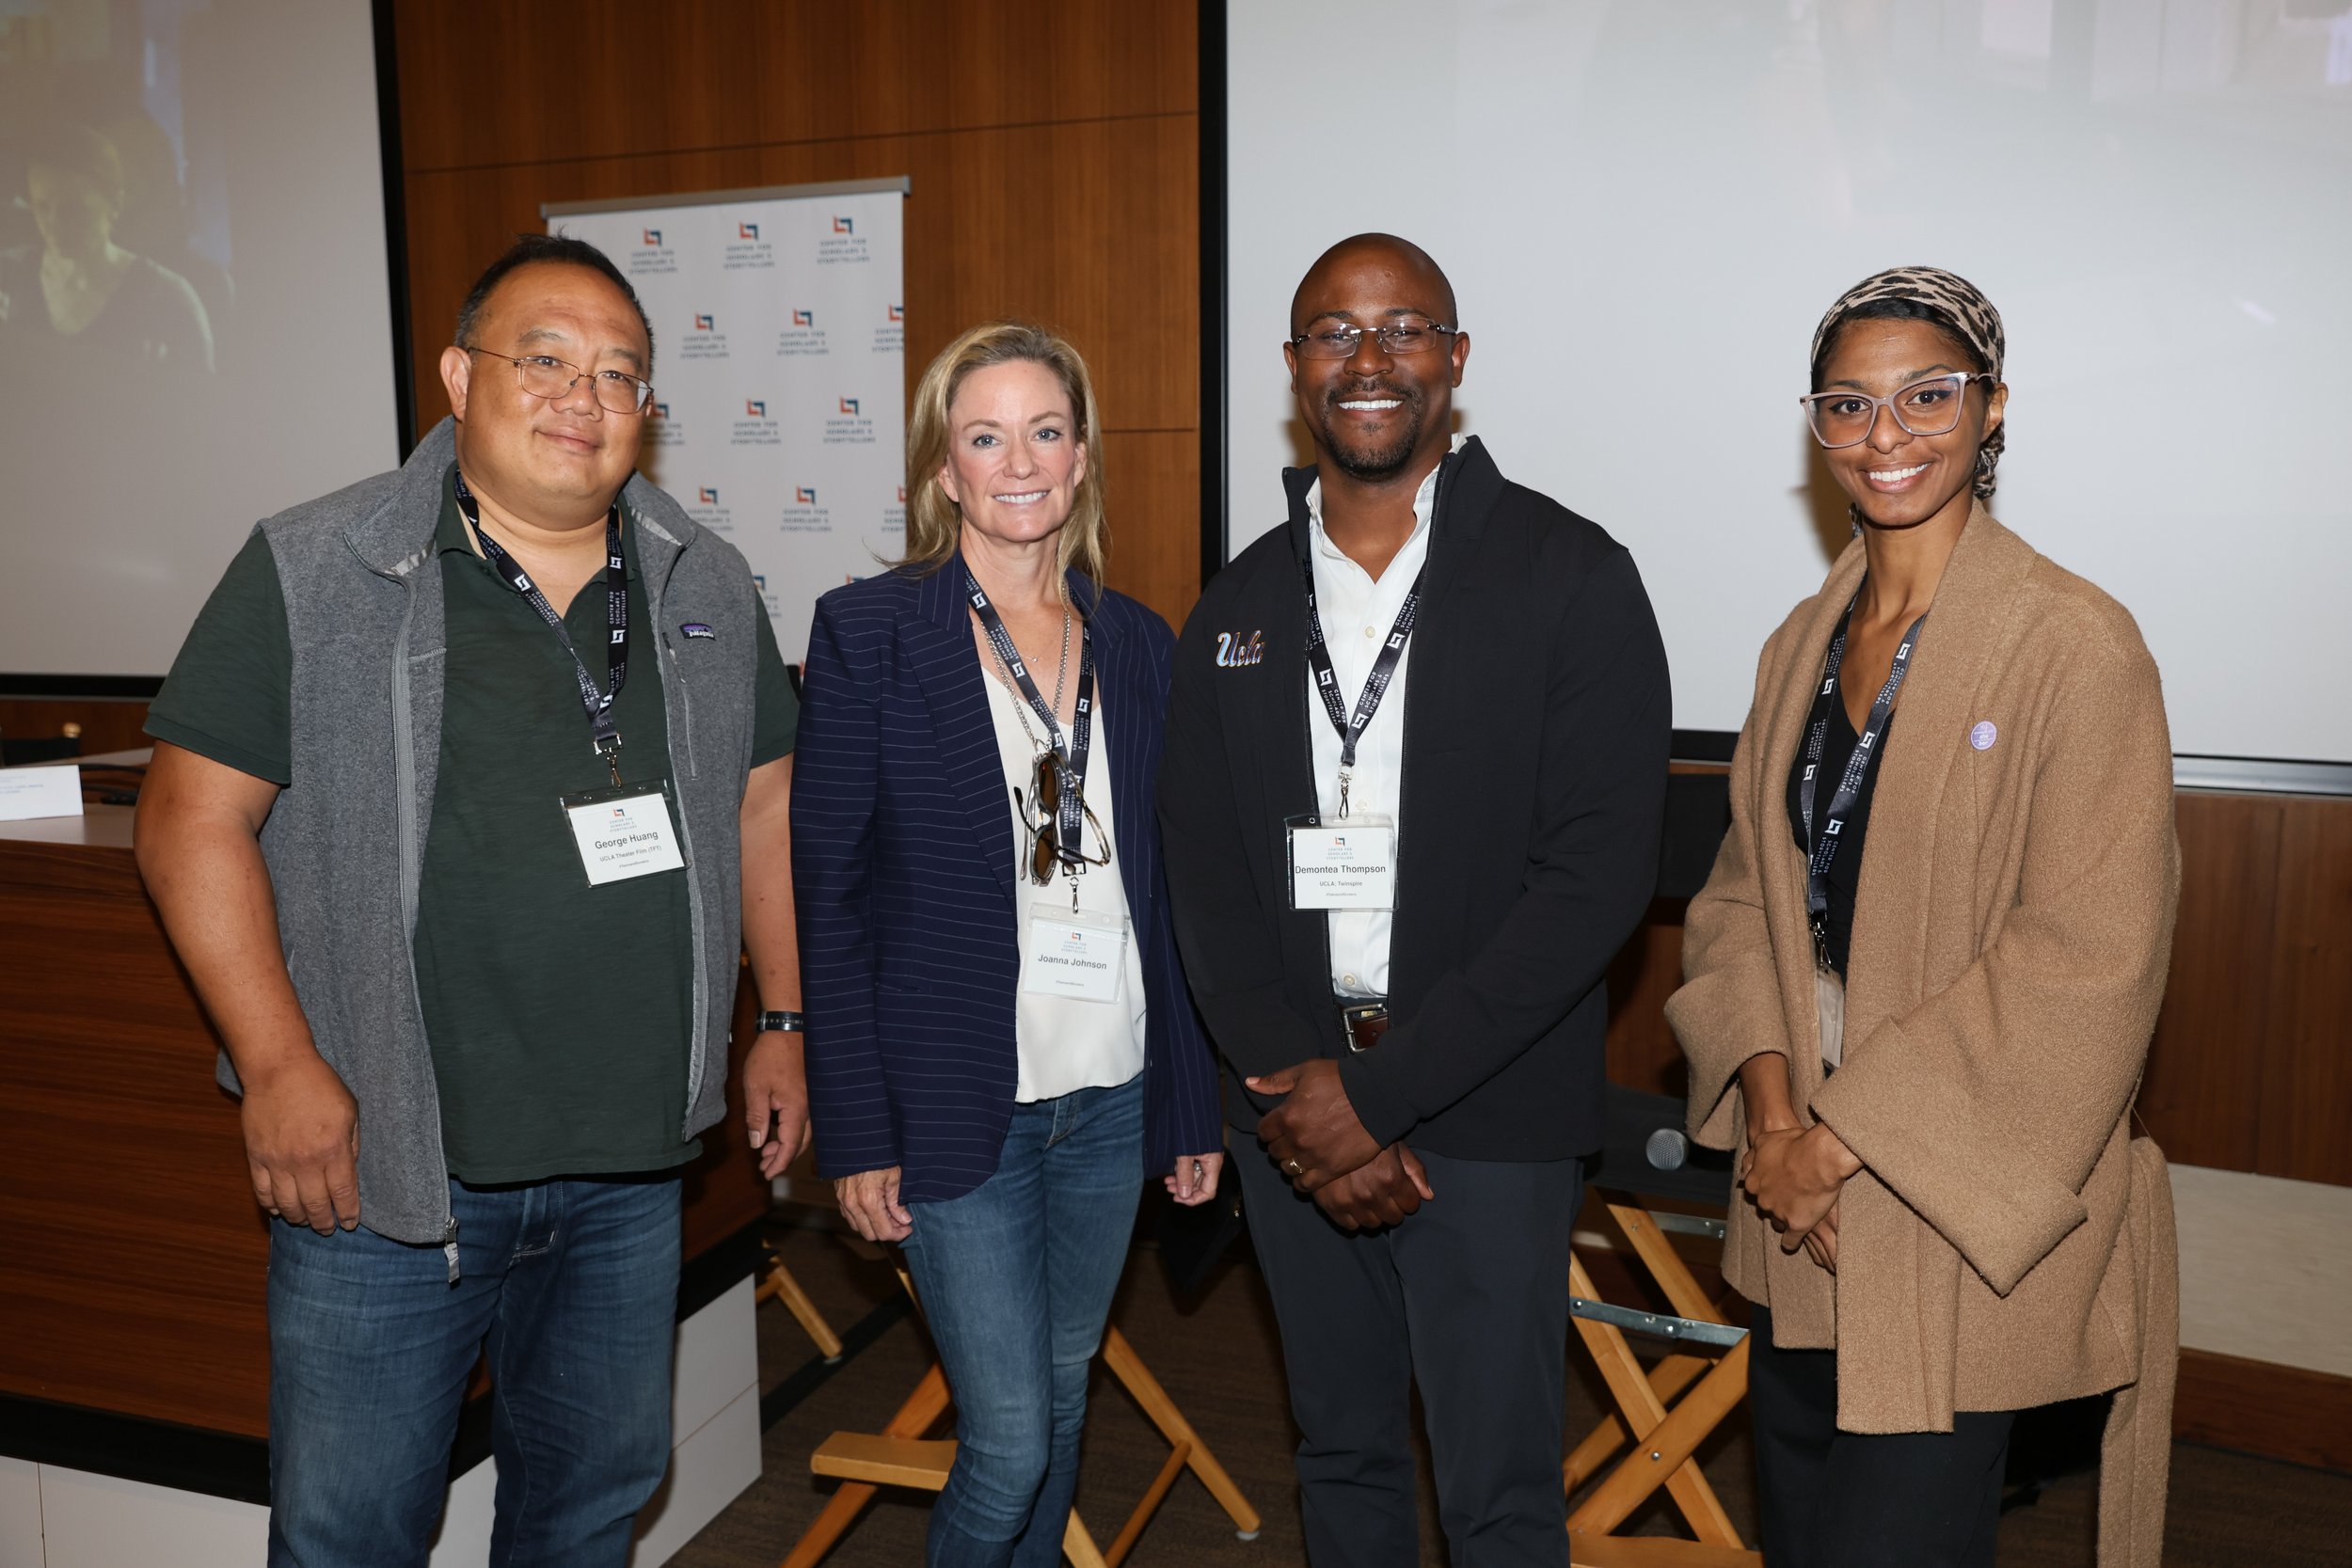  Beyond Tropes: Rethinking Foster Care Portrayals Panelists- George Huang (Screenwriting Professor), Joanna Johnson (Writer, Producer &amp; Director), Demontea Thompson (CSS Fellow, Twinspire Co-Founder &amp; Executive Director), and Dr. Tiera Tanksl